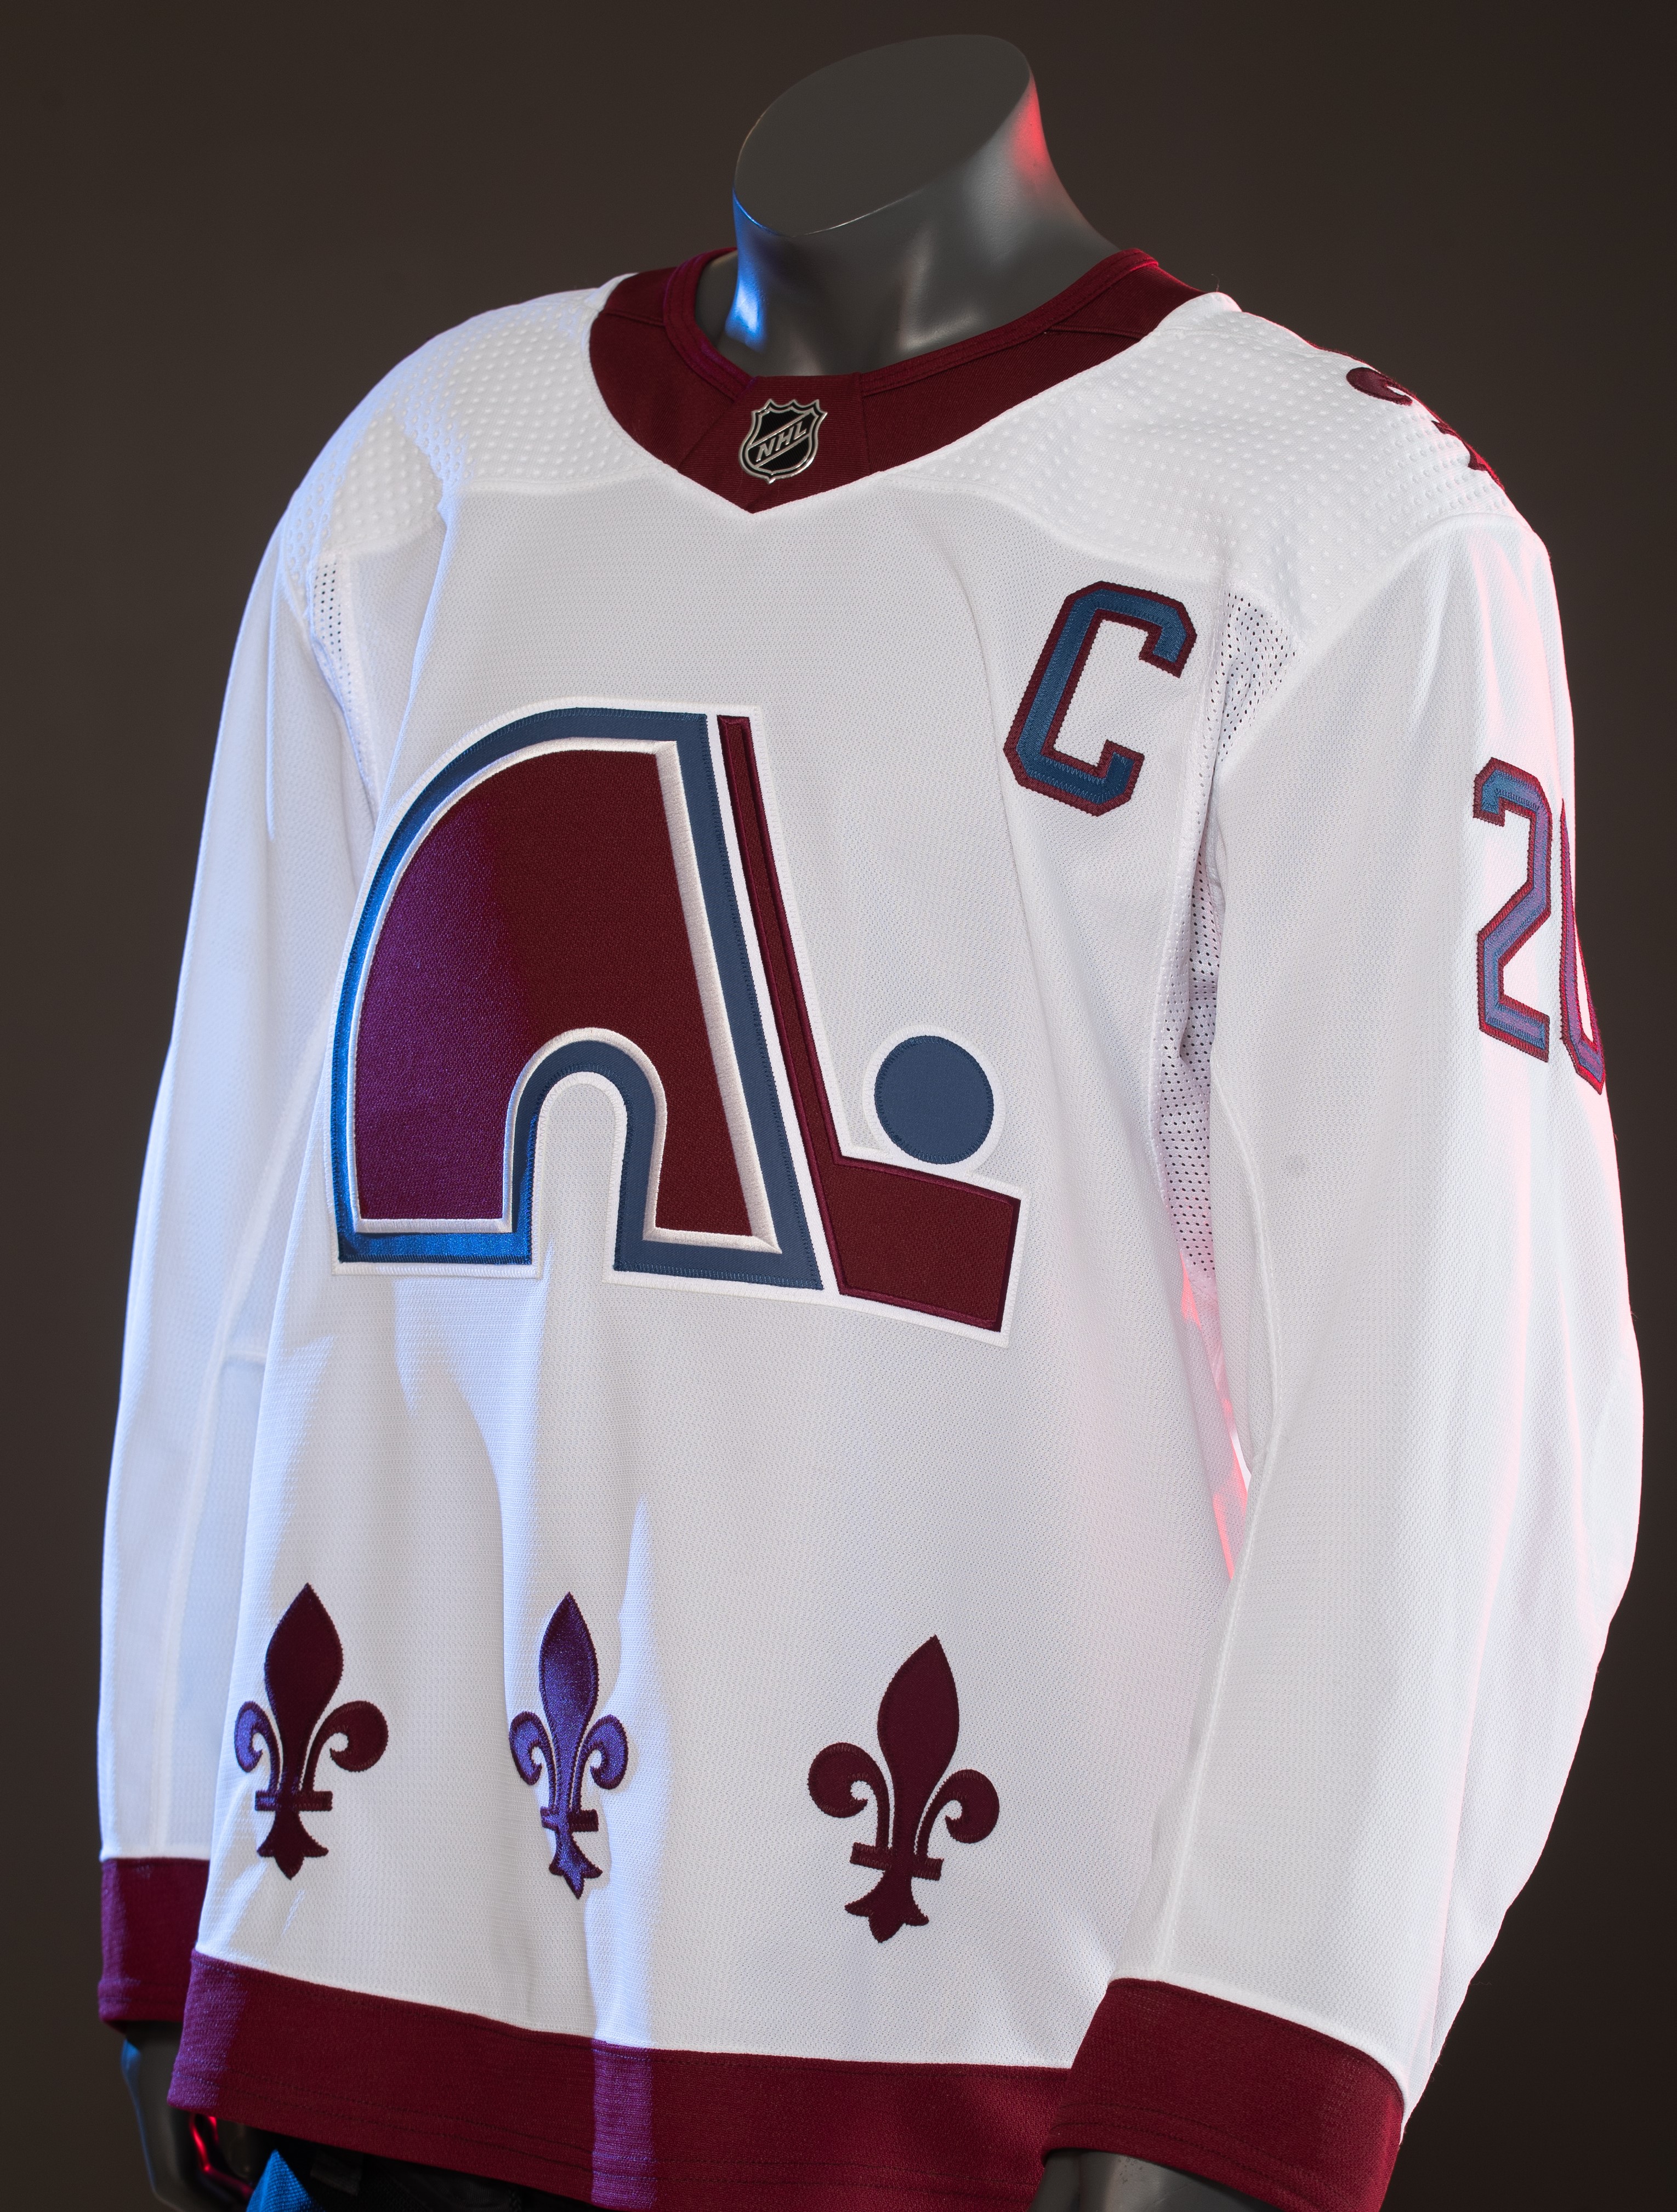 Colorado Avalanche - We all love the Reverse Retro jerseys, but which one  is your favorite? (HINT: the one on this post is pretty nice) VOTE:  nhl.com/fans/nhl-reverse-retro-poll